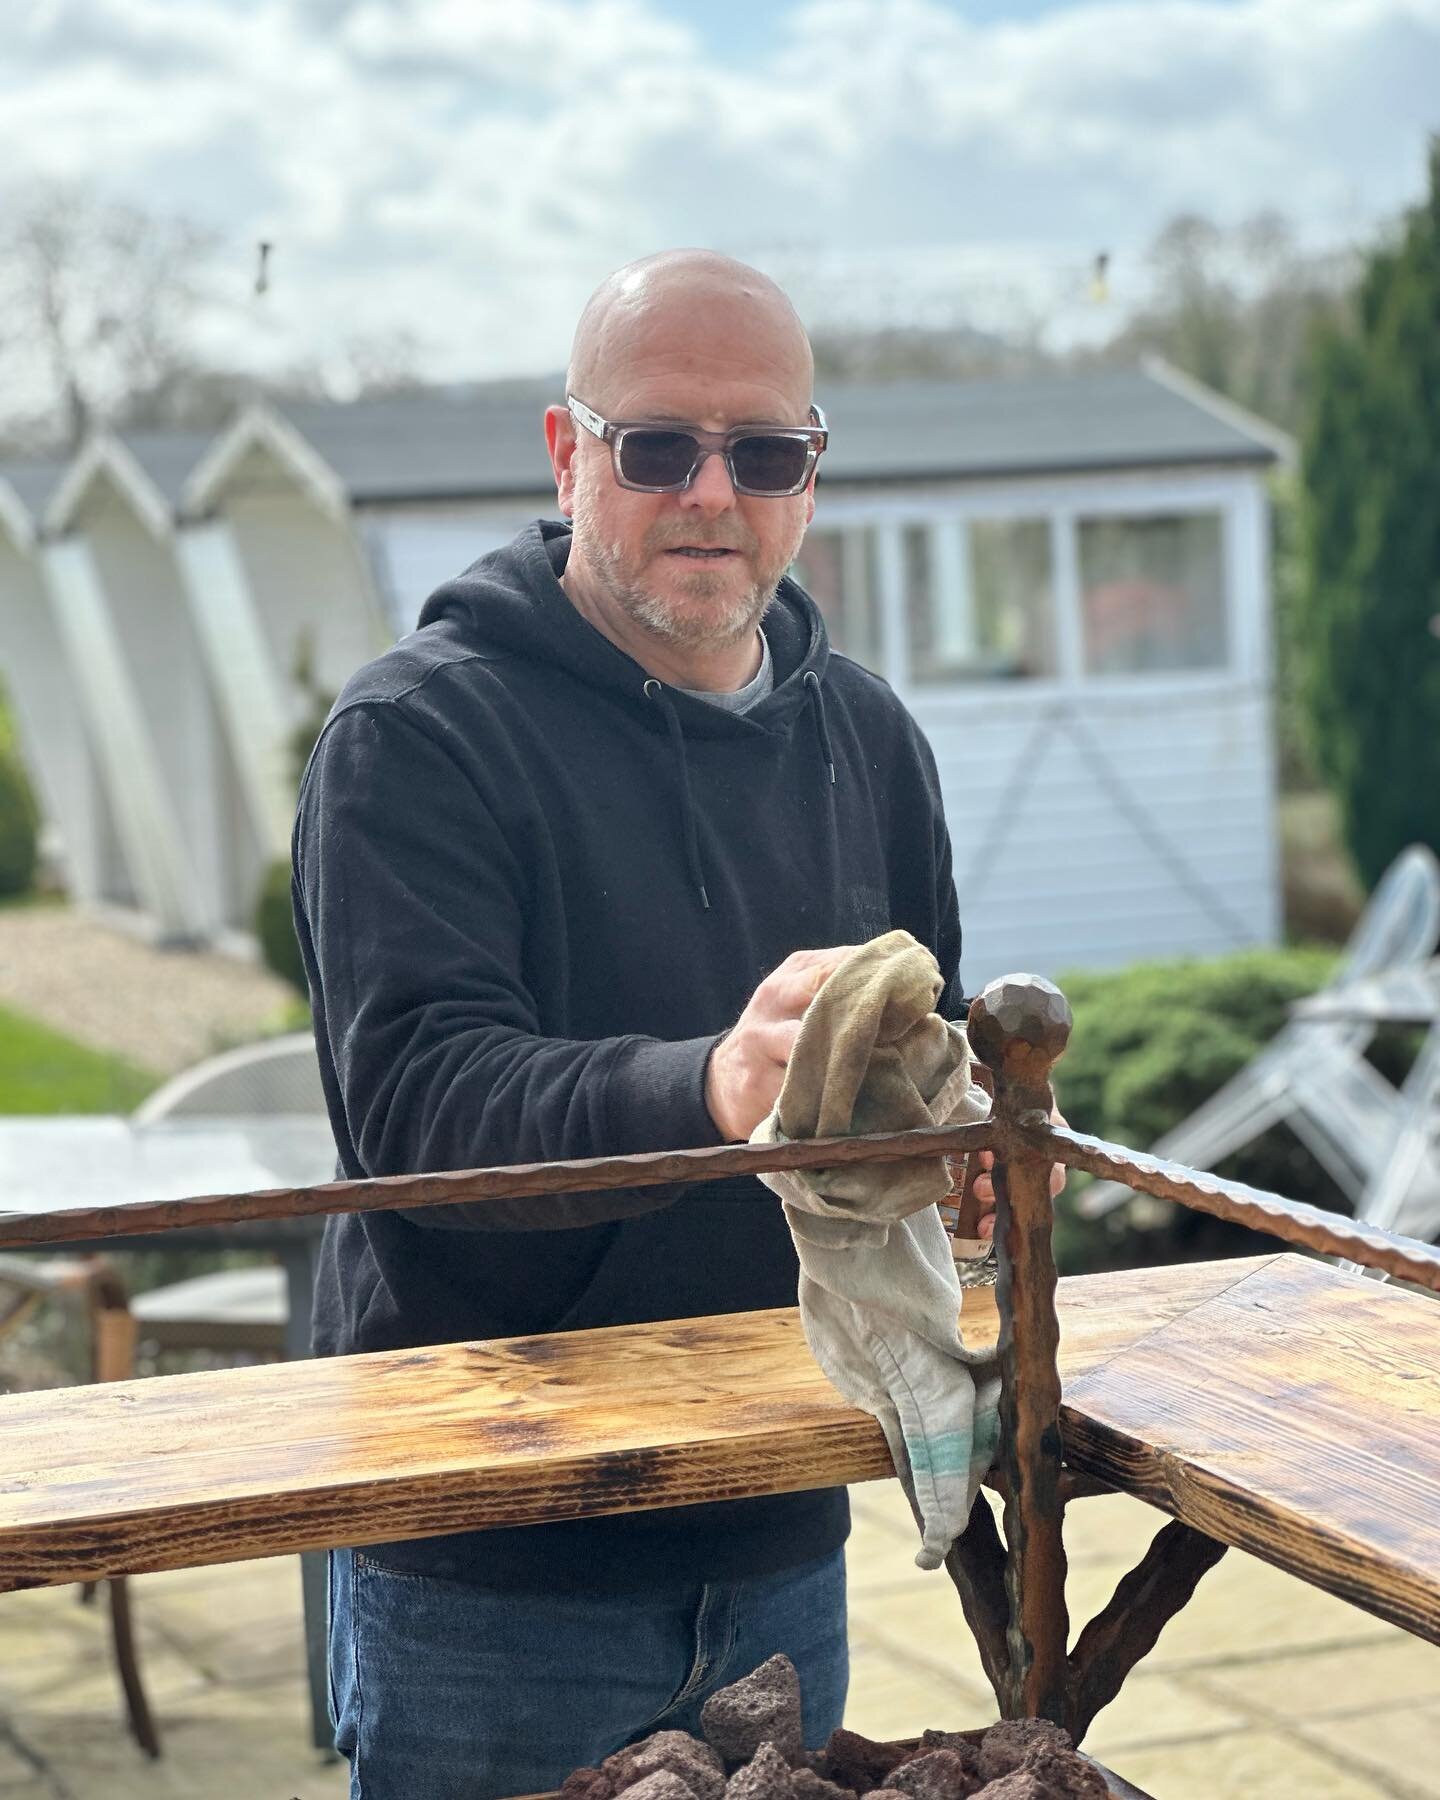 Getting the Fire Pit &ldquo;spring&rdquo; ready 🙌 ☀️ this will be fantastic once the warmer weather and balmy nights are here - seating up to 16 people - perfect for a bite to eat or a drink or two 😉&hearts;️

Team Sweeney x
#springiscoming #suppor